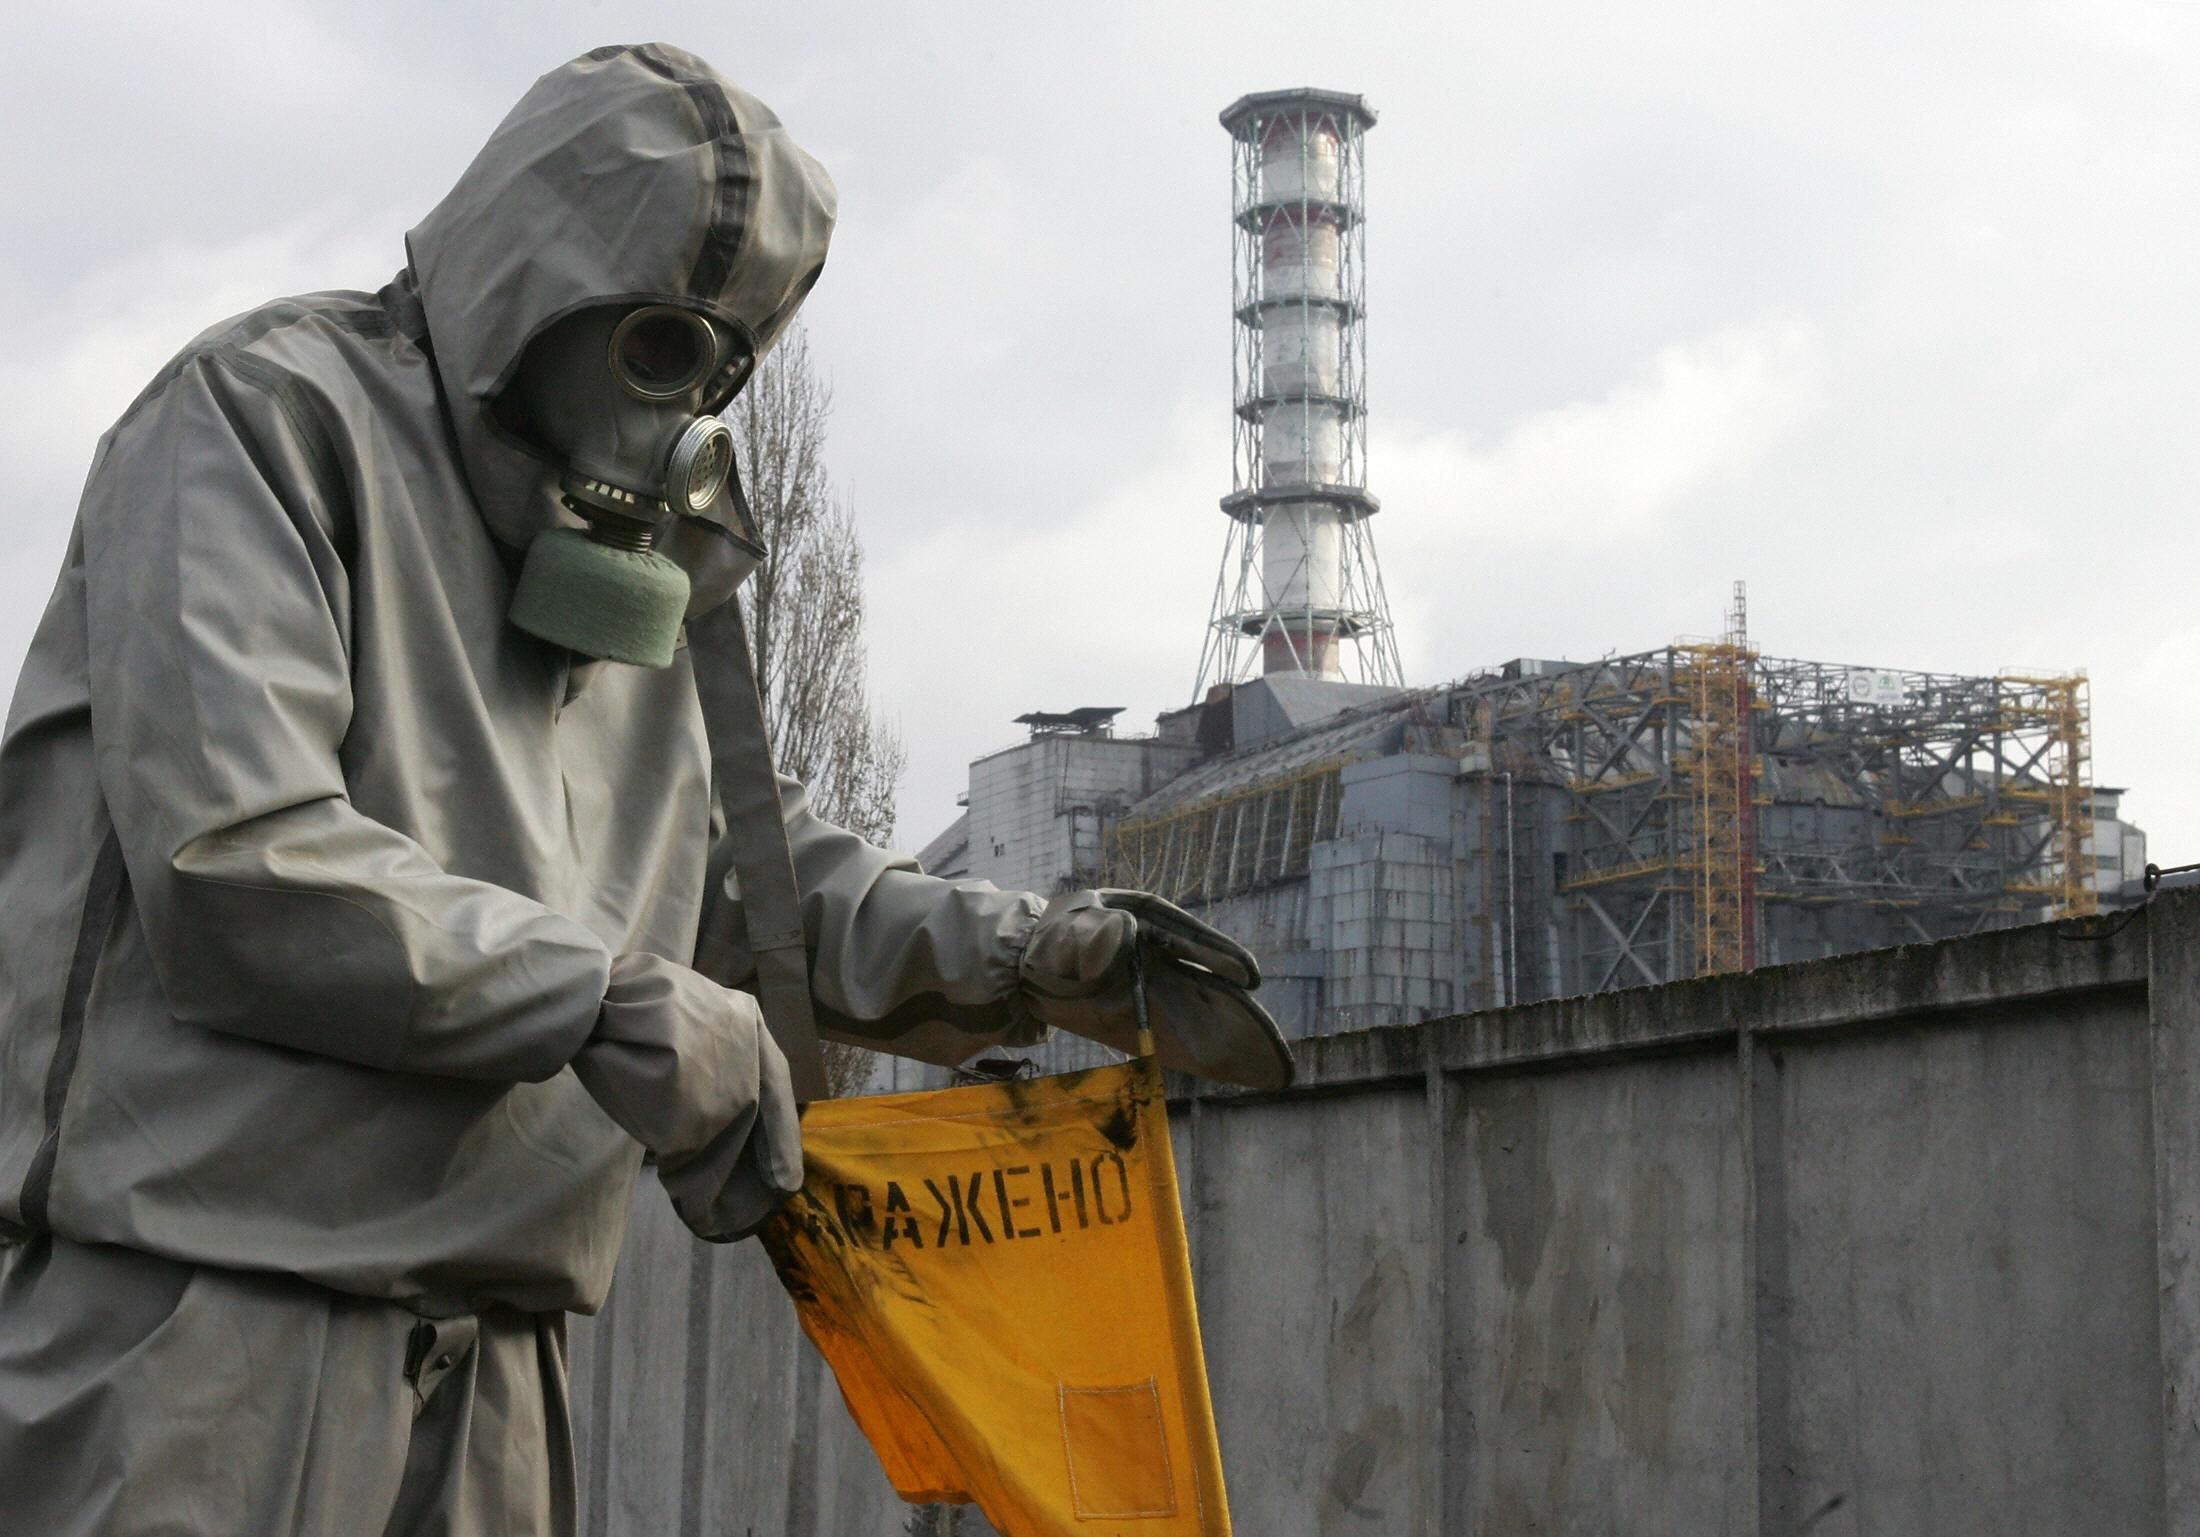 A worker sets a flag signaling radioactivity in front of the Chernobyl nuclear power plant during a drill organized by Ukraine's Emergency Ministry on November 8, 2006.